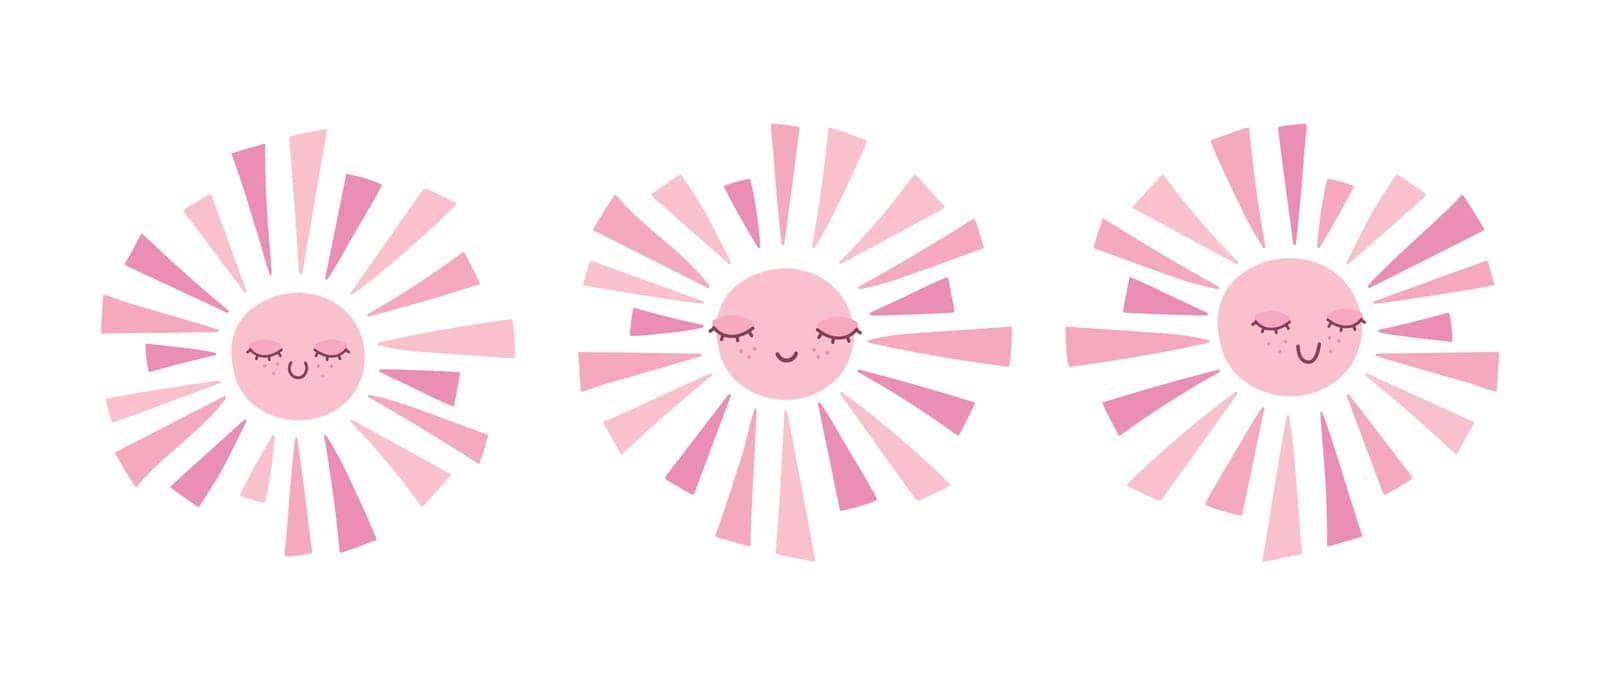 Cute hand drawn smiling sun in pink color set. Scandinavian style decoration for nursery kids room. Vector illustration 